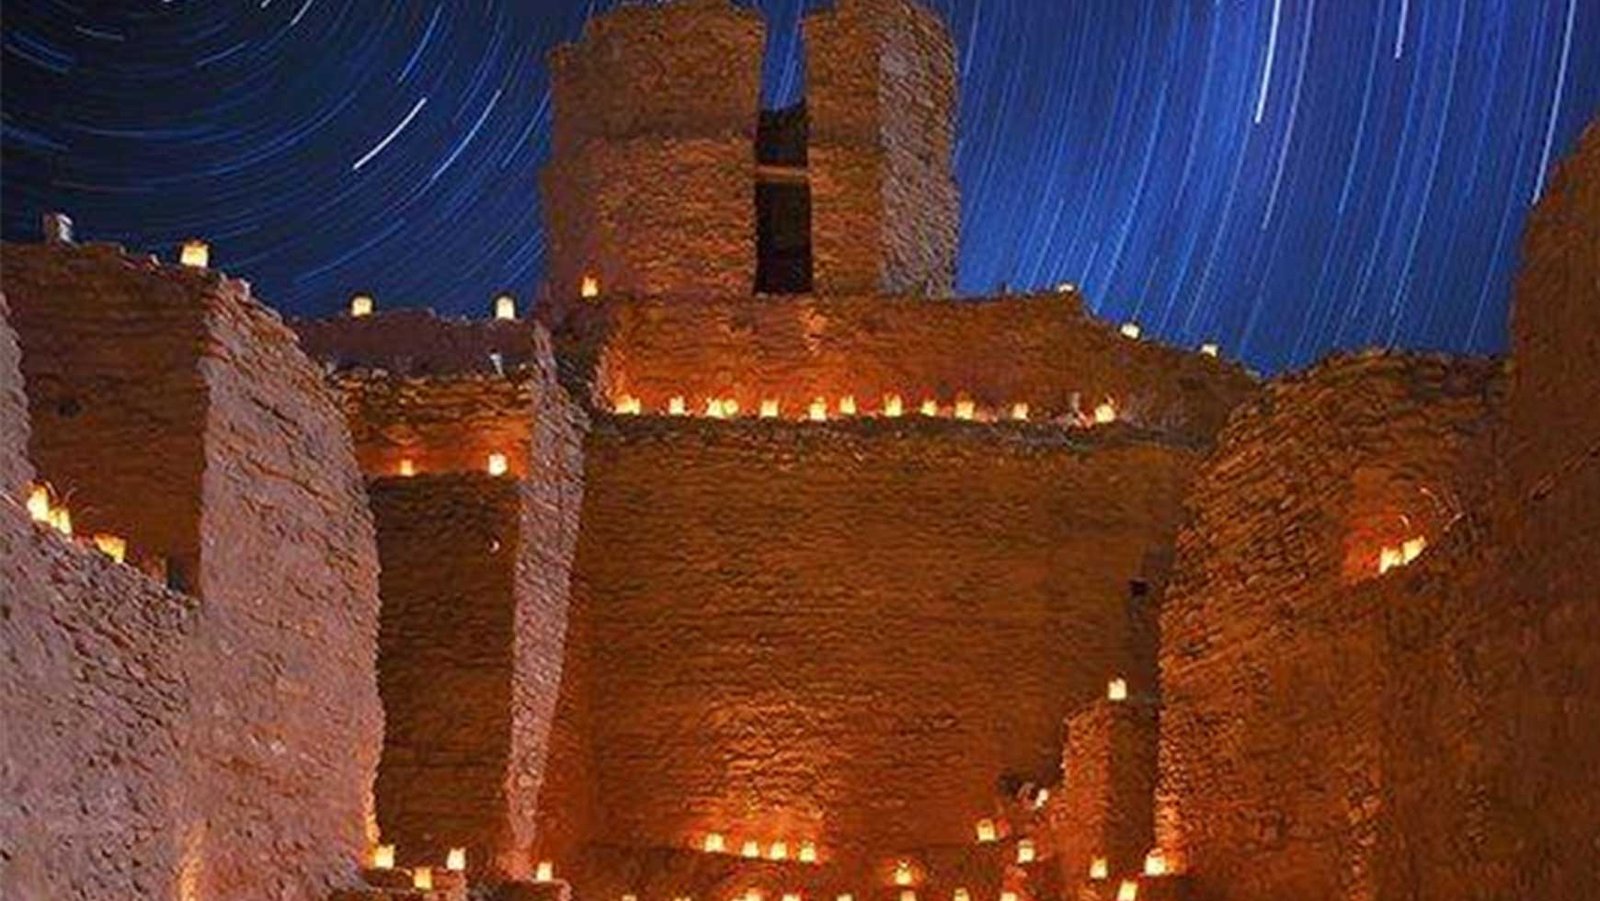 Adobe building with lanterns and night sky